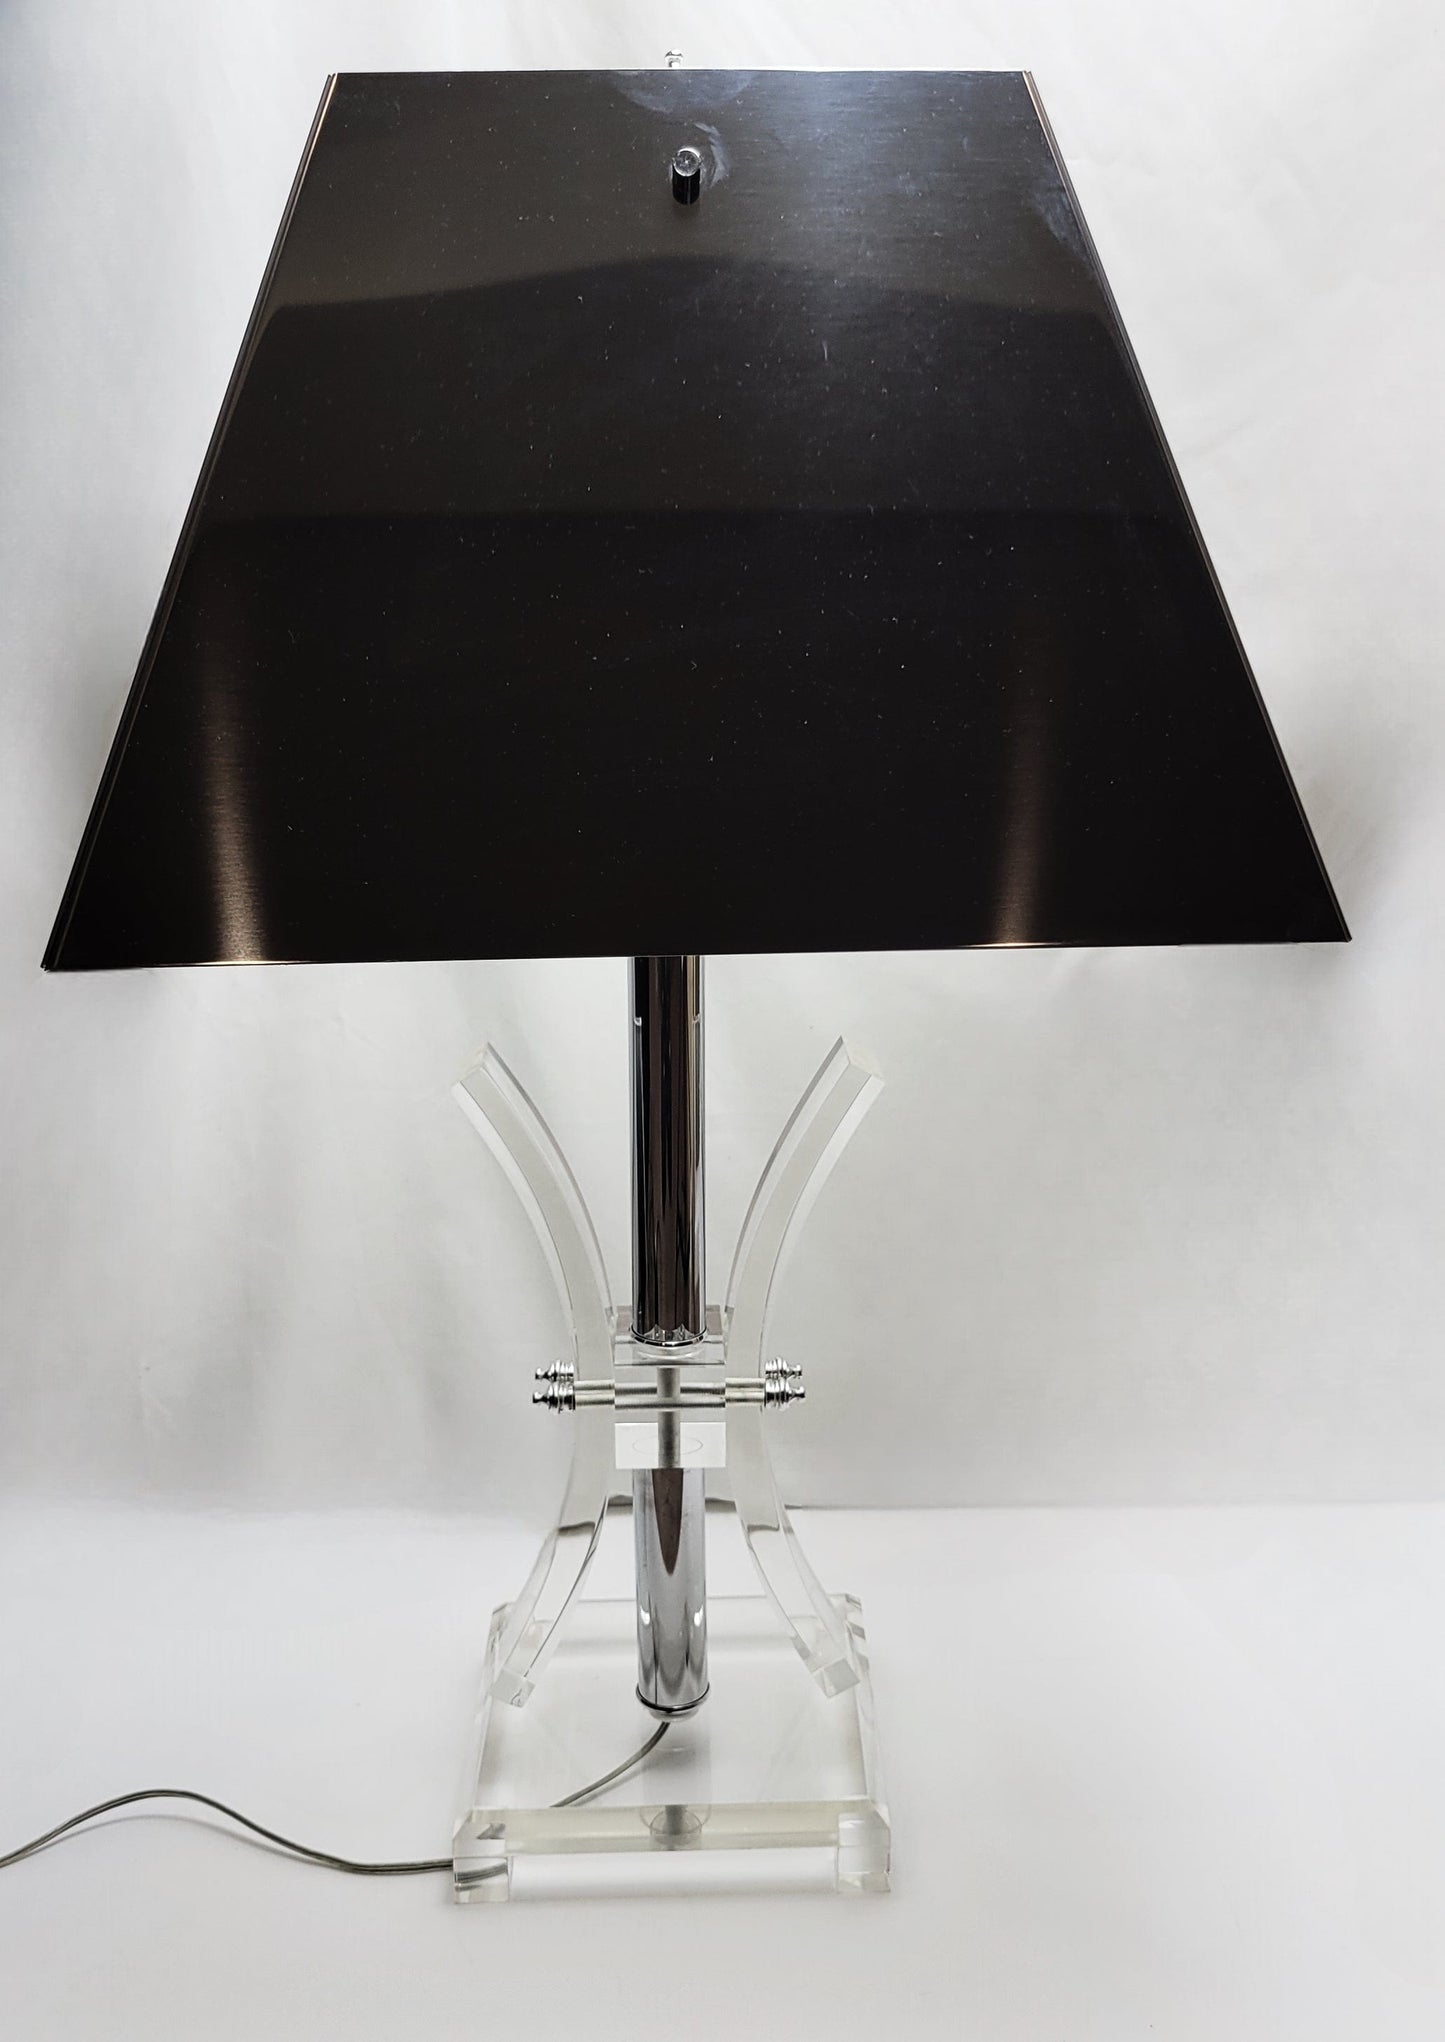 C Jere Lamp Superb Curtis Jere Chrome & Lucite Abstract Modernist Table Lamp Circa 1960's